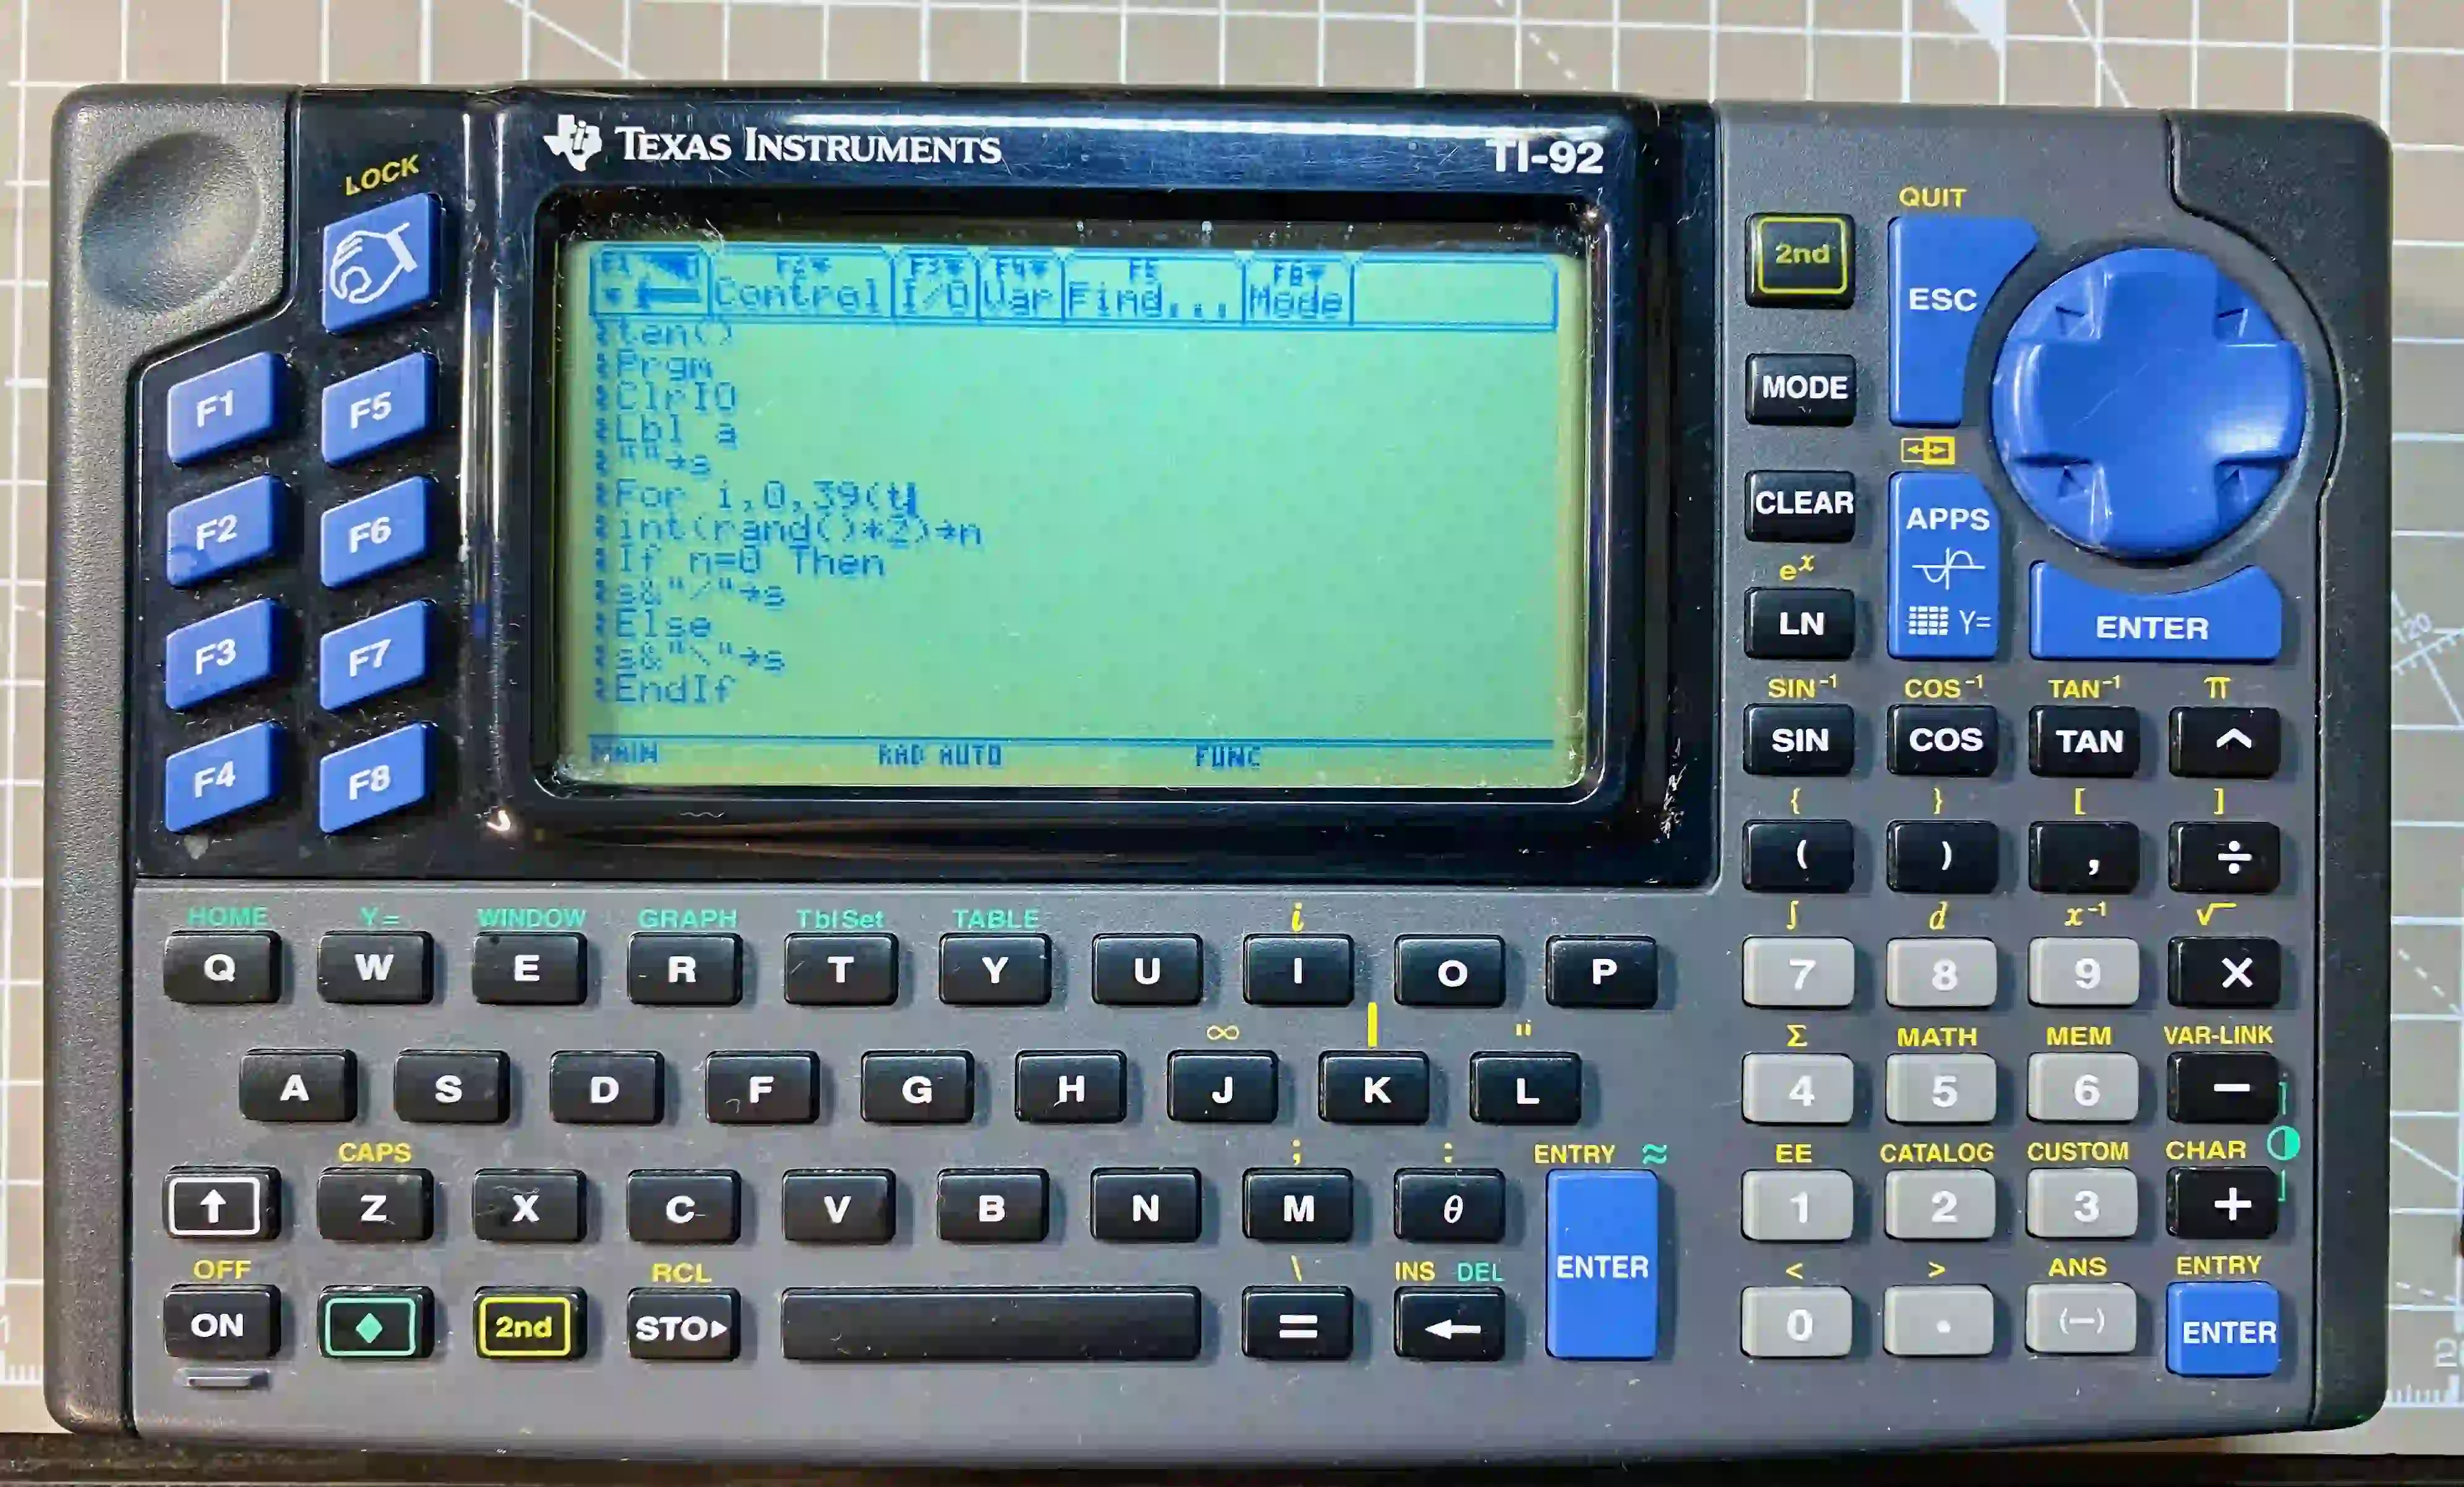 image from 10 Print on the TI-92